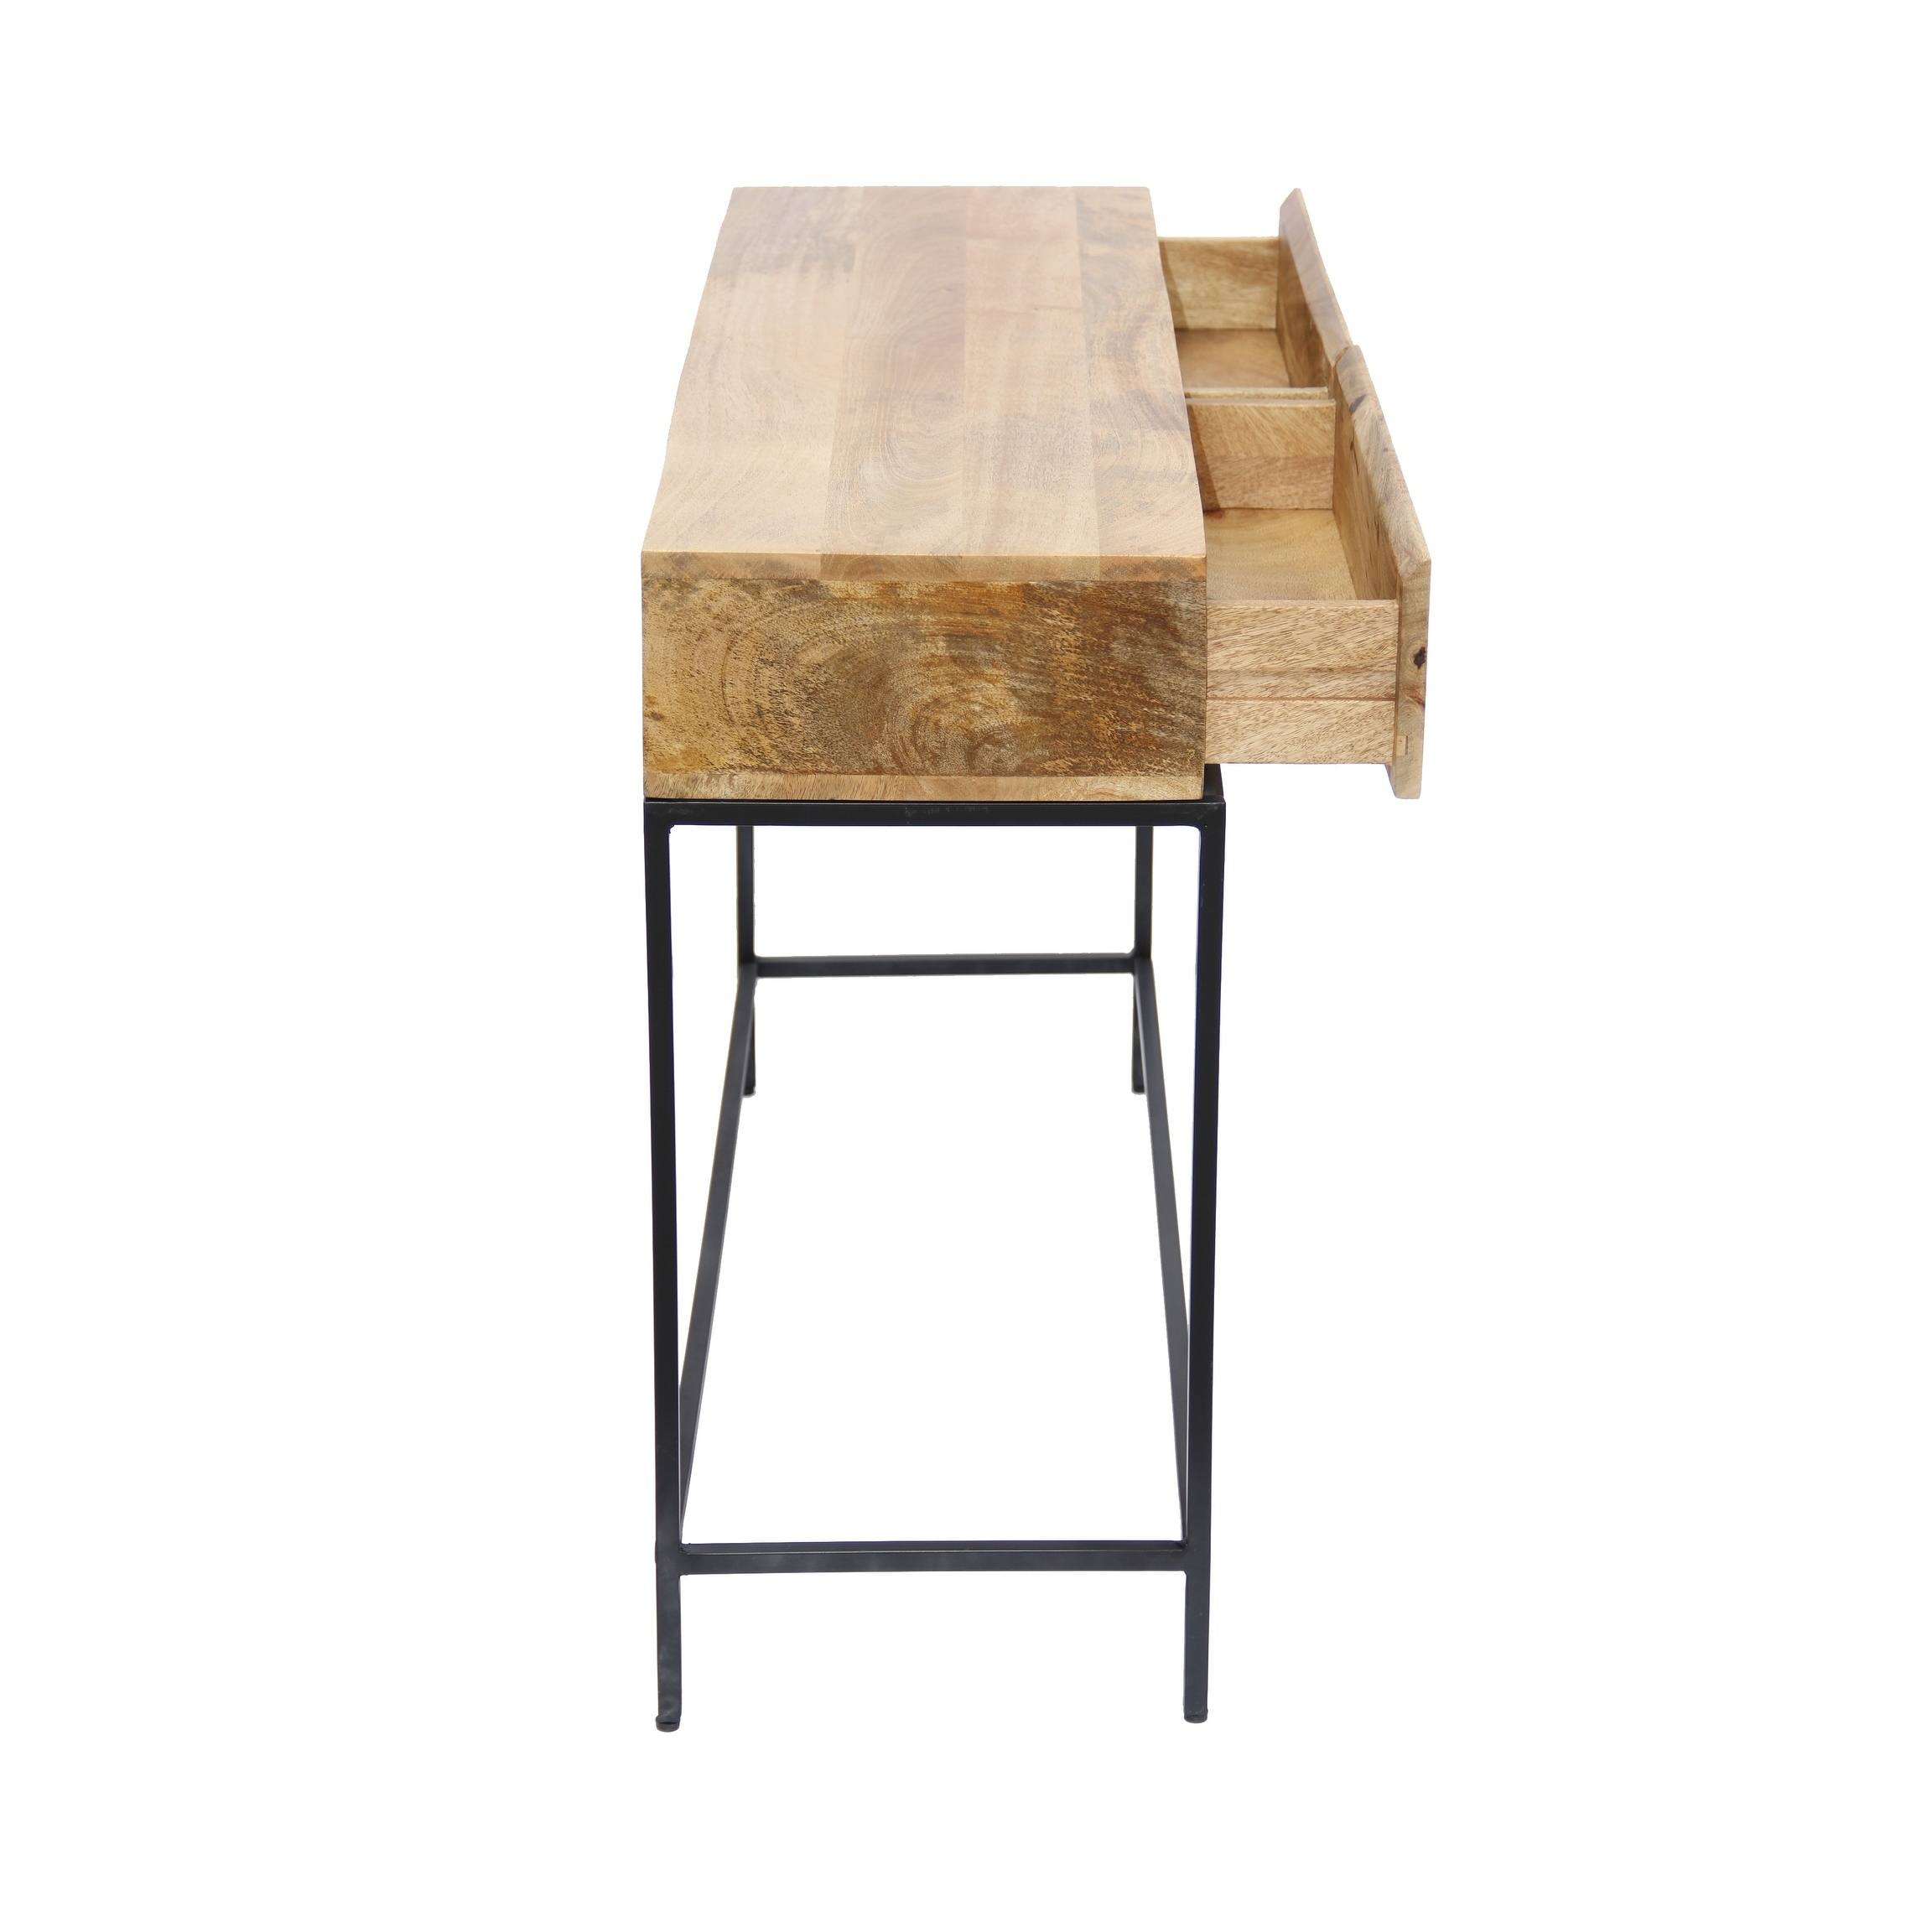 The Urban Port Industrial Style Console Table With Two Drawers ...